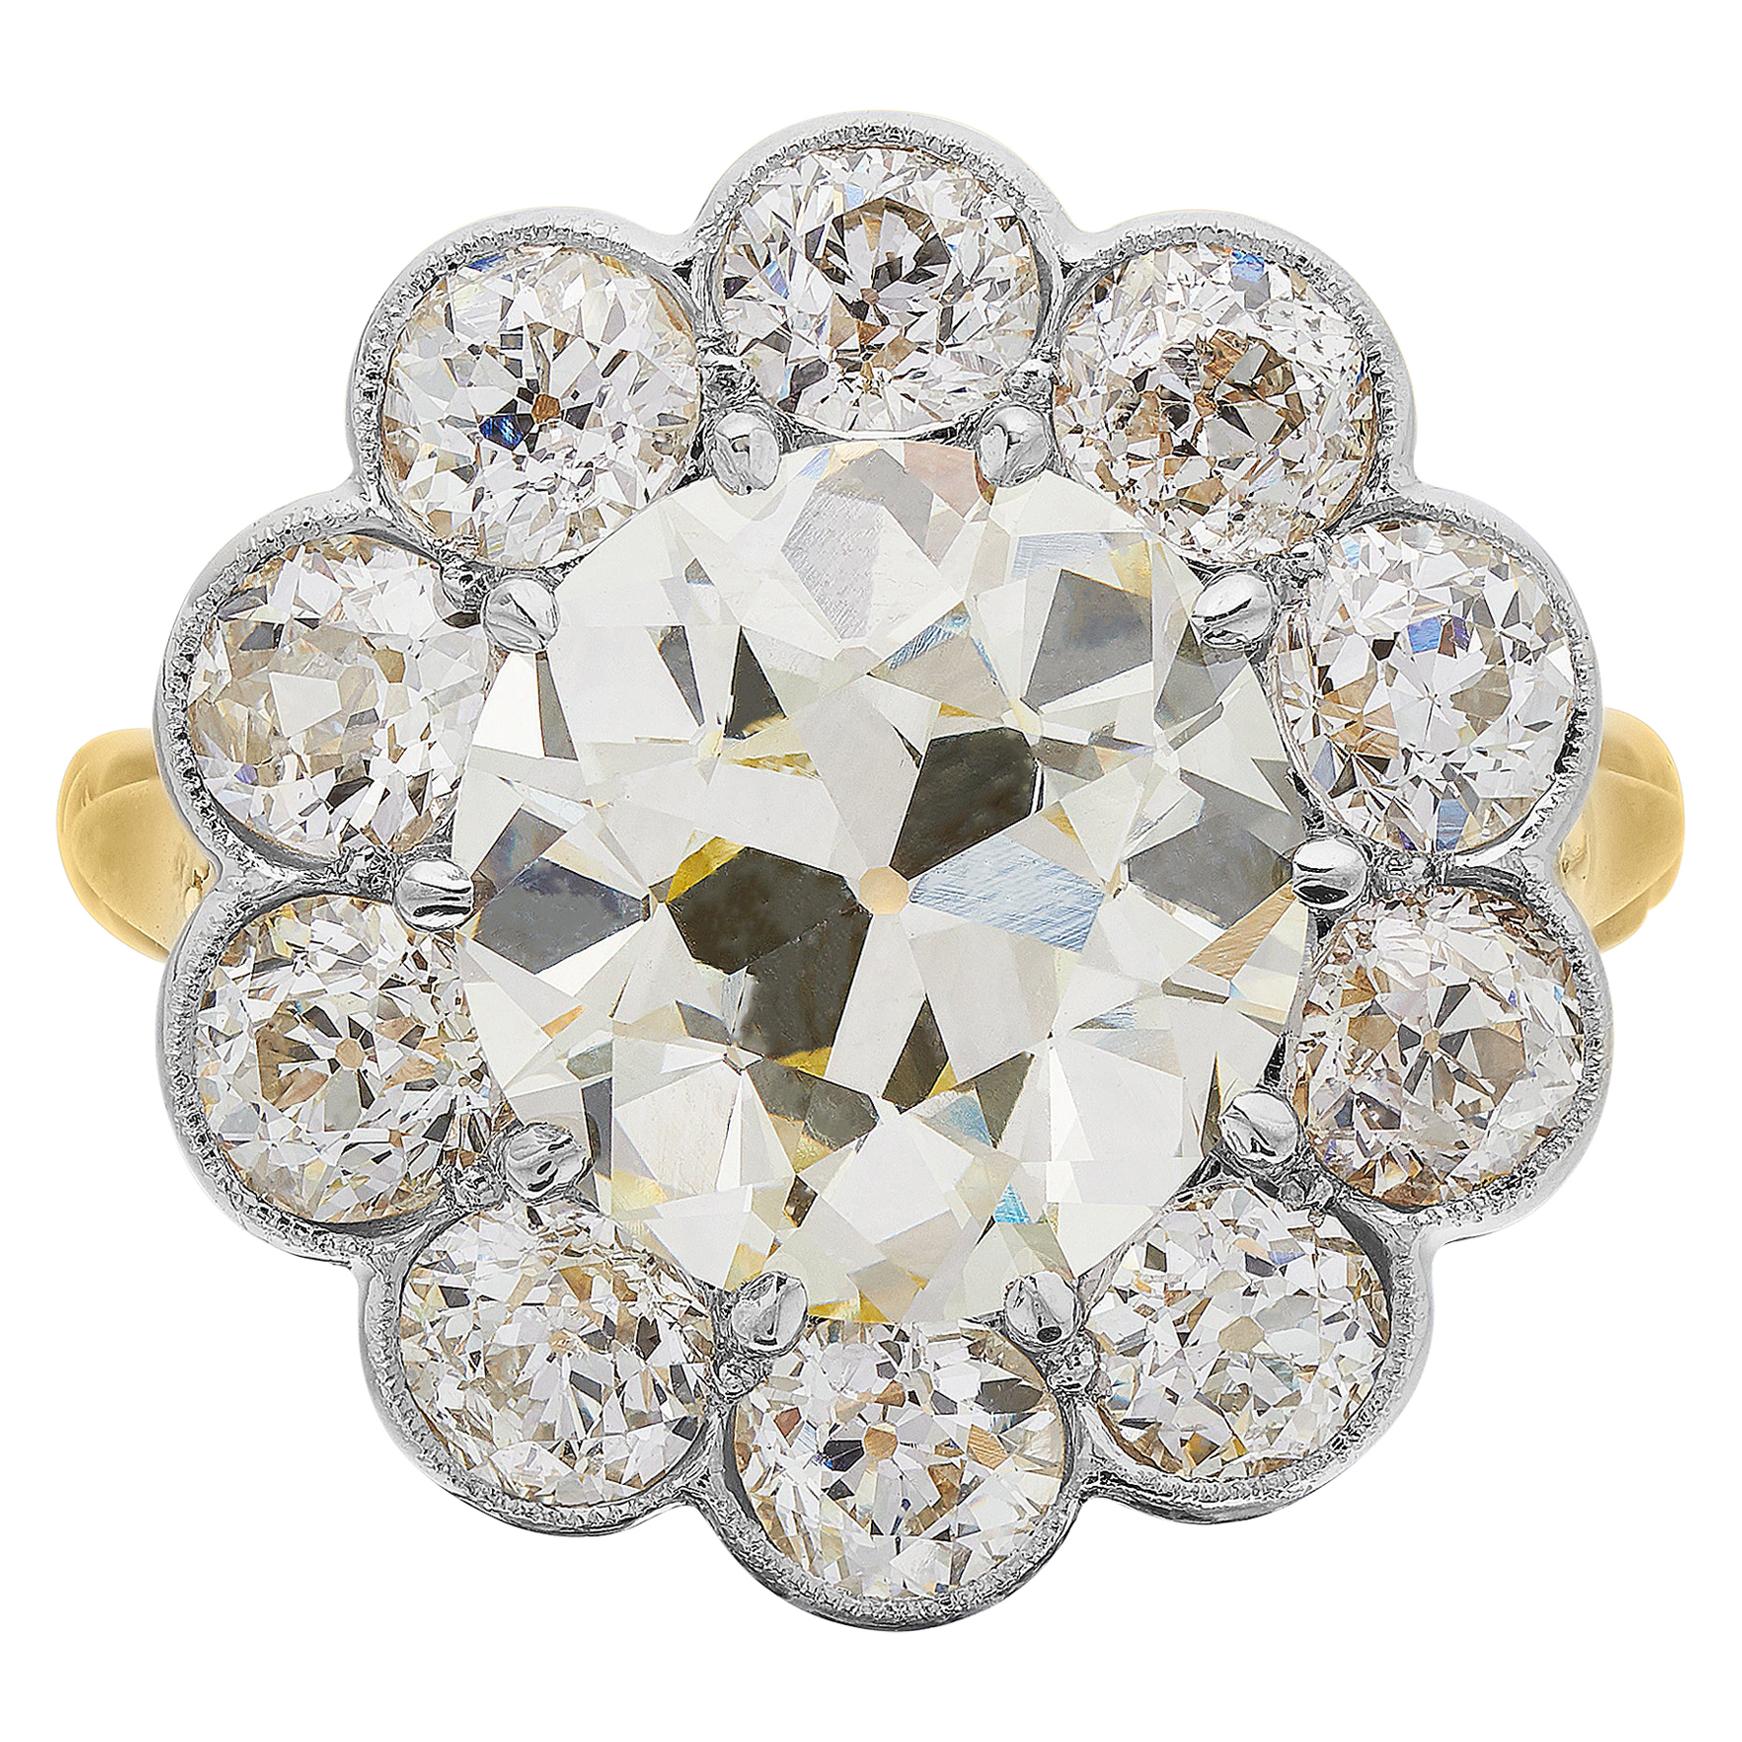 Certified Fancy Light Yellow Diamond 4.6 Carat Antique Old Cut Cluster Ring